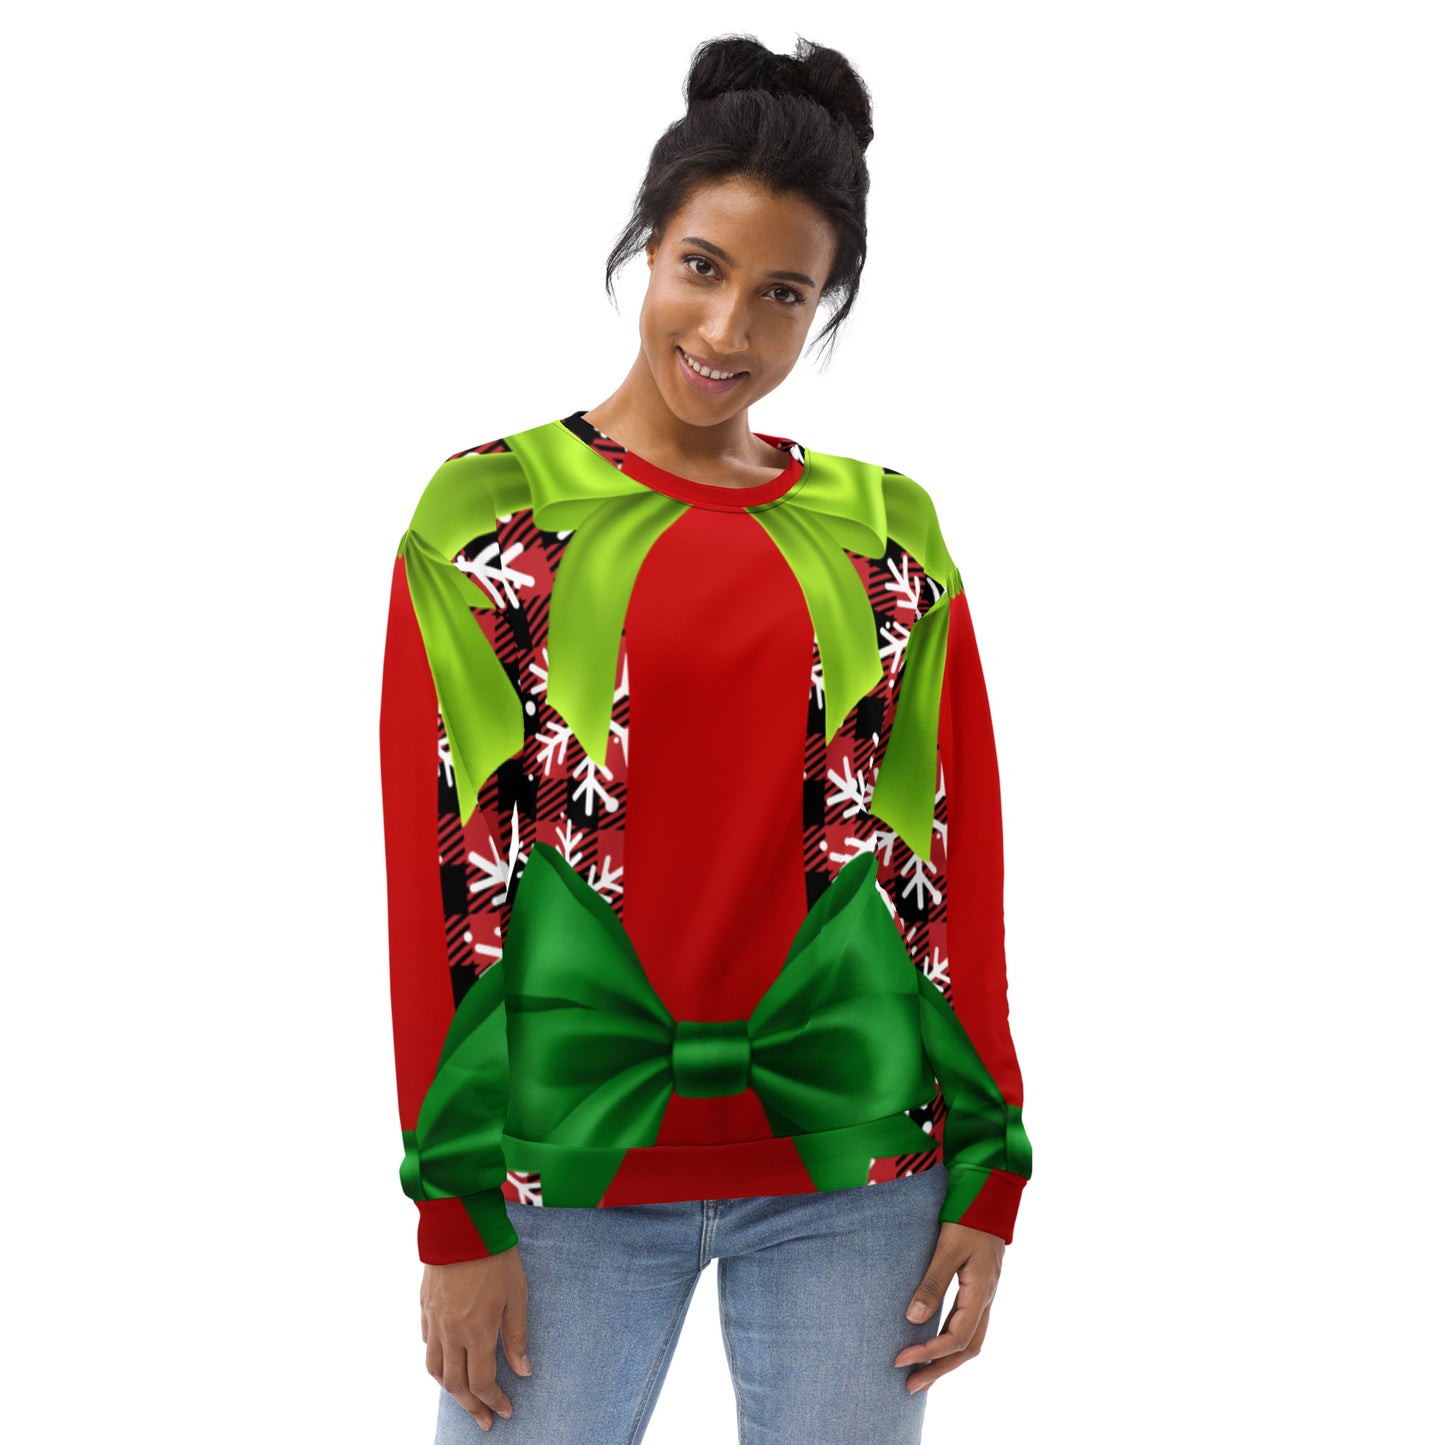 "Wrapped with a Bow" Holiday Ugly Sweater (Red)